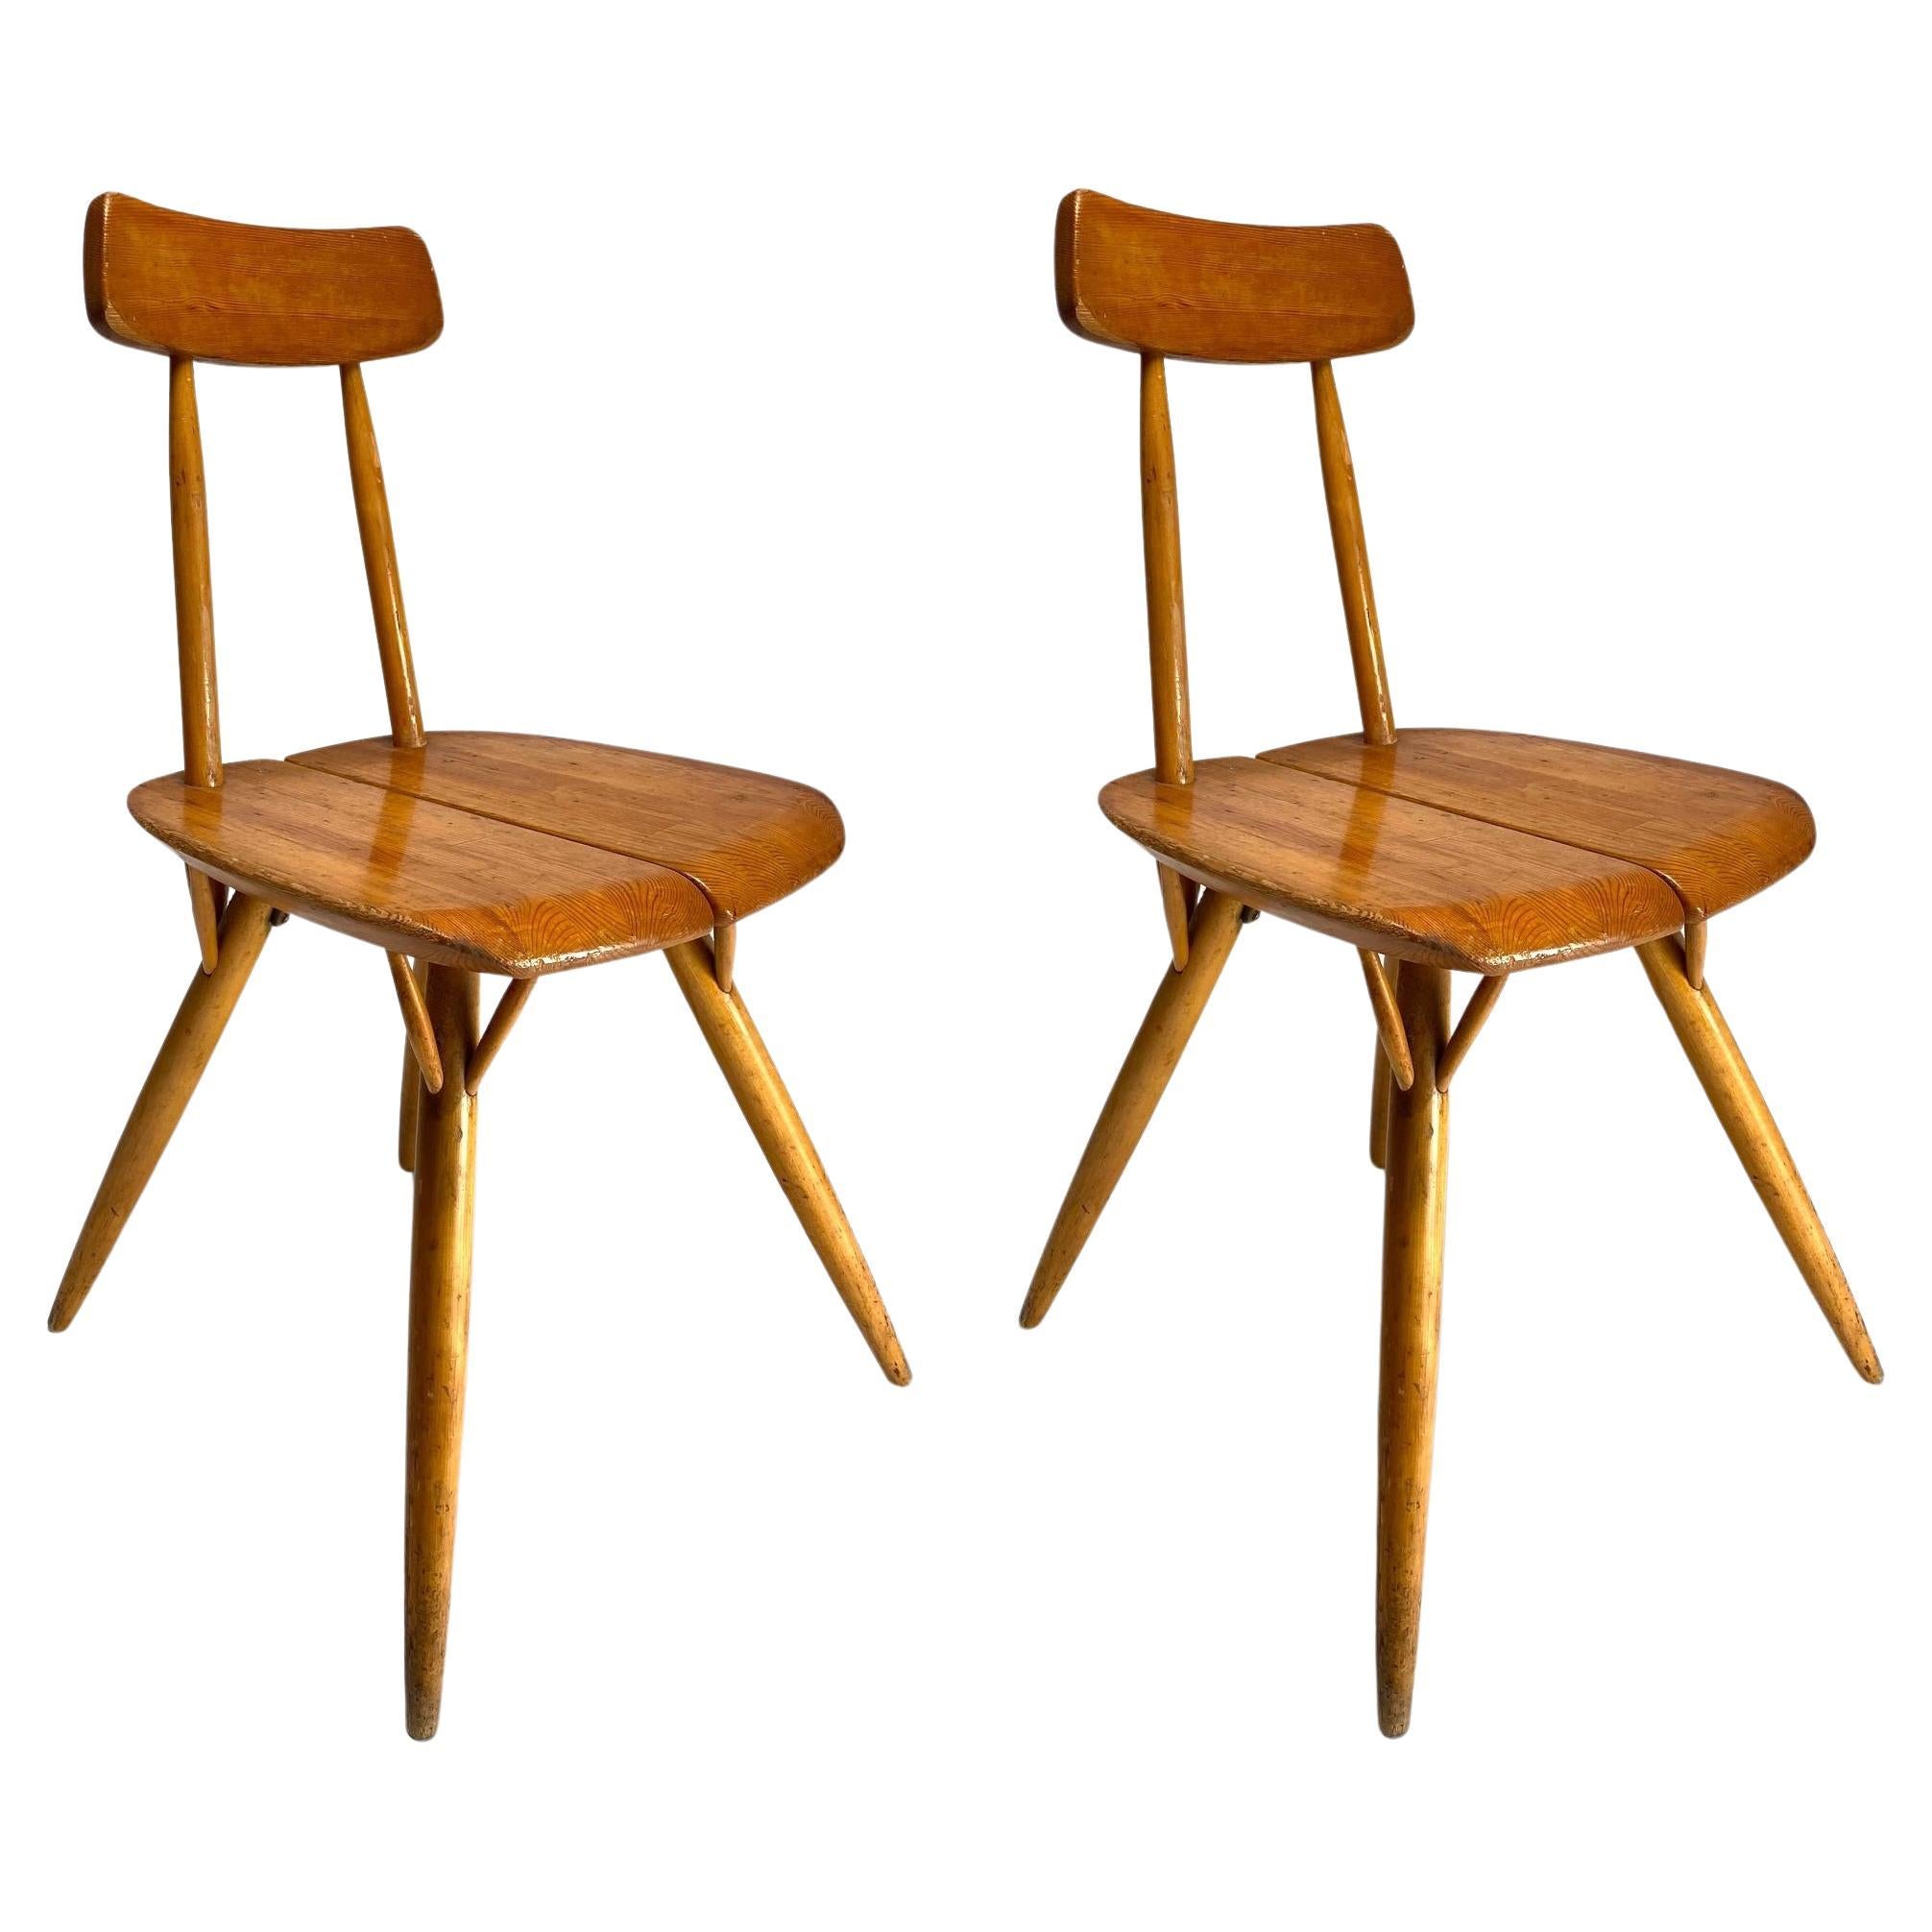 Set of Two "Pirkka" Dining Chairs by Ilmari Tapiovaara for Laukaan Puu, Finland For Sale